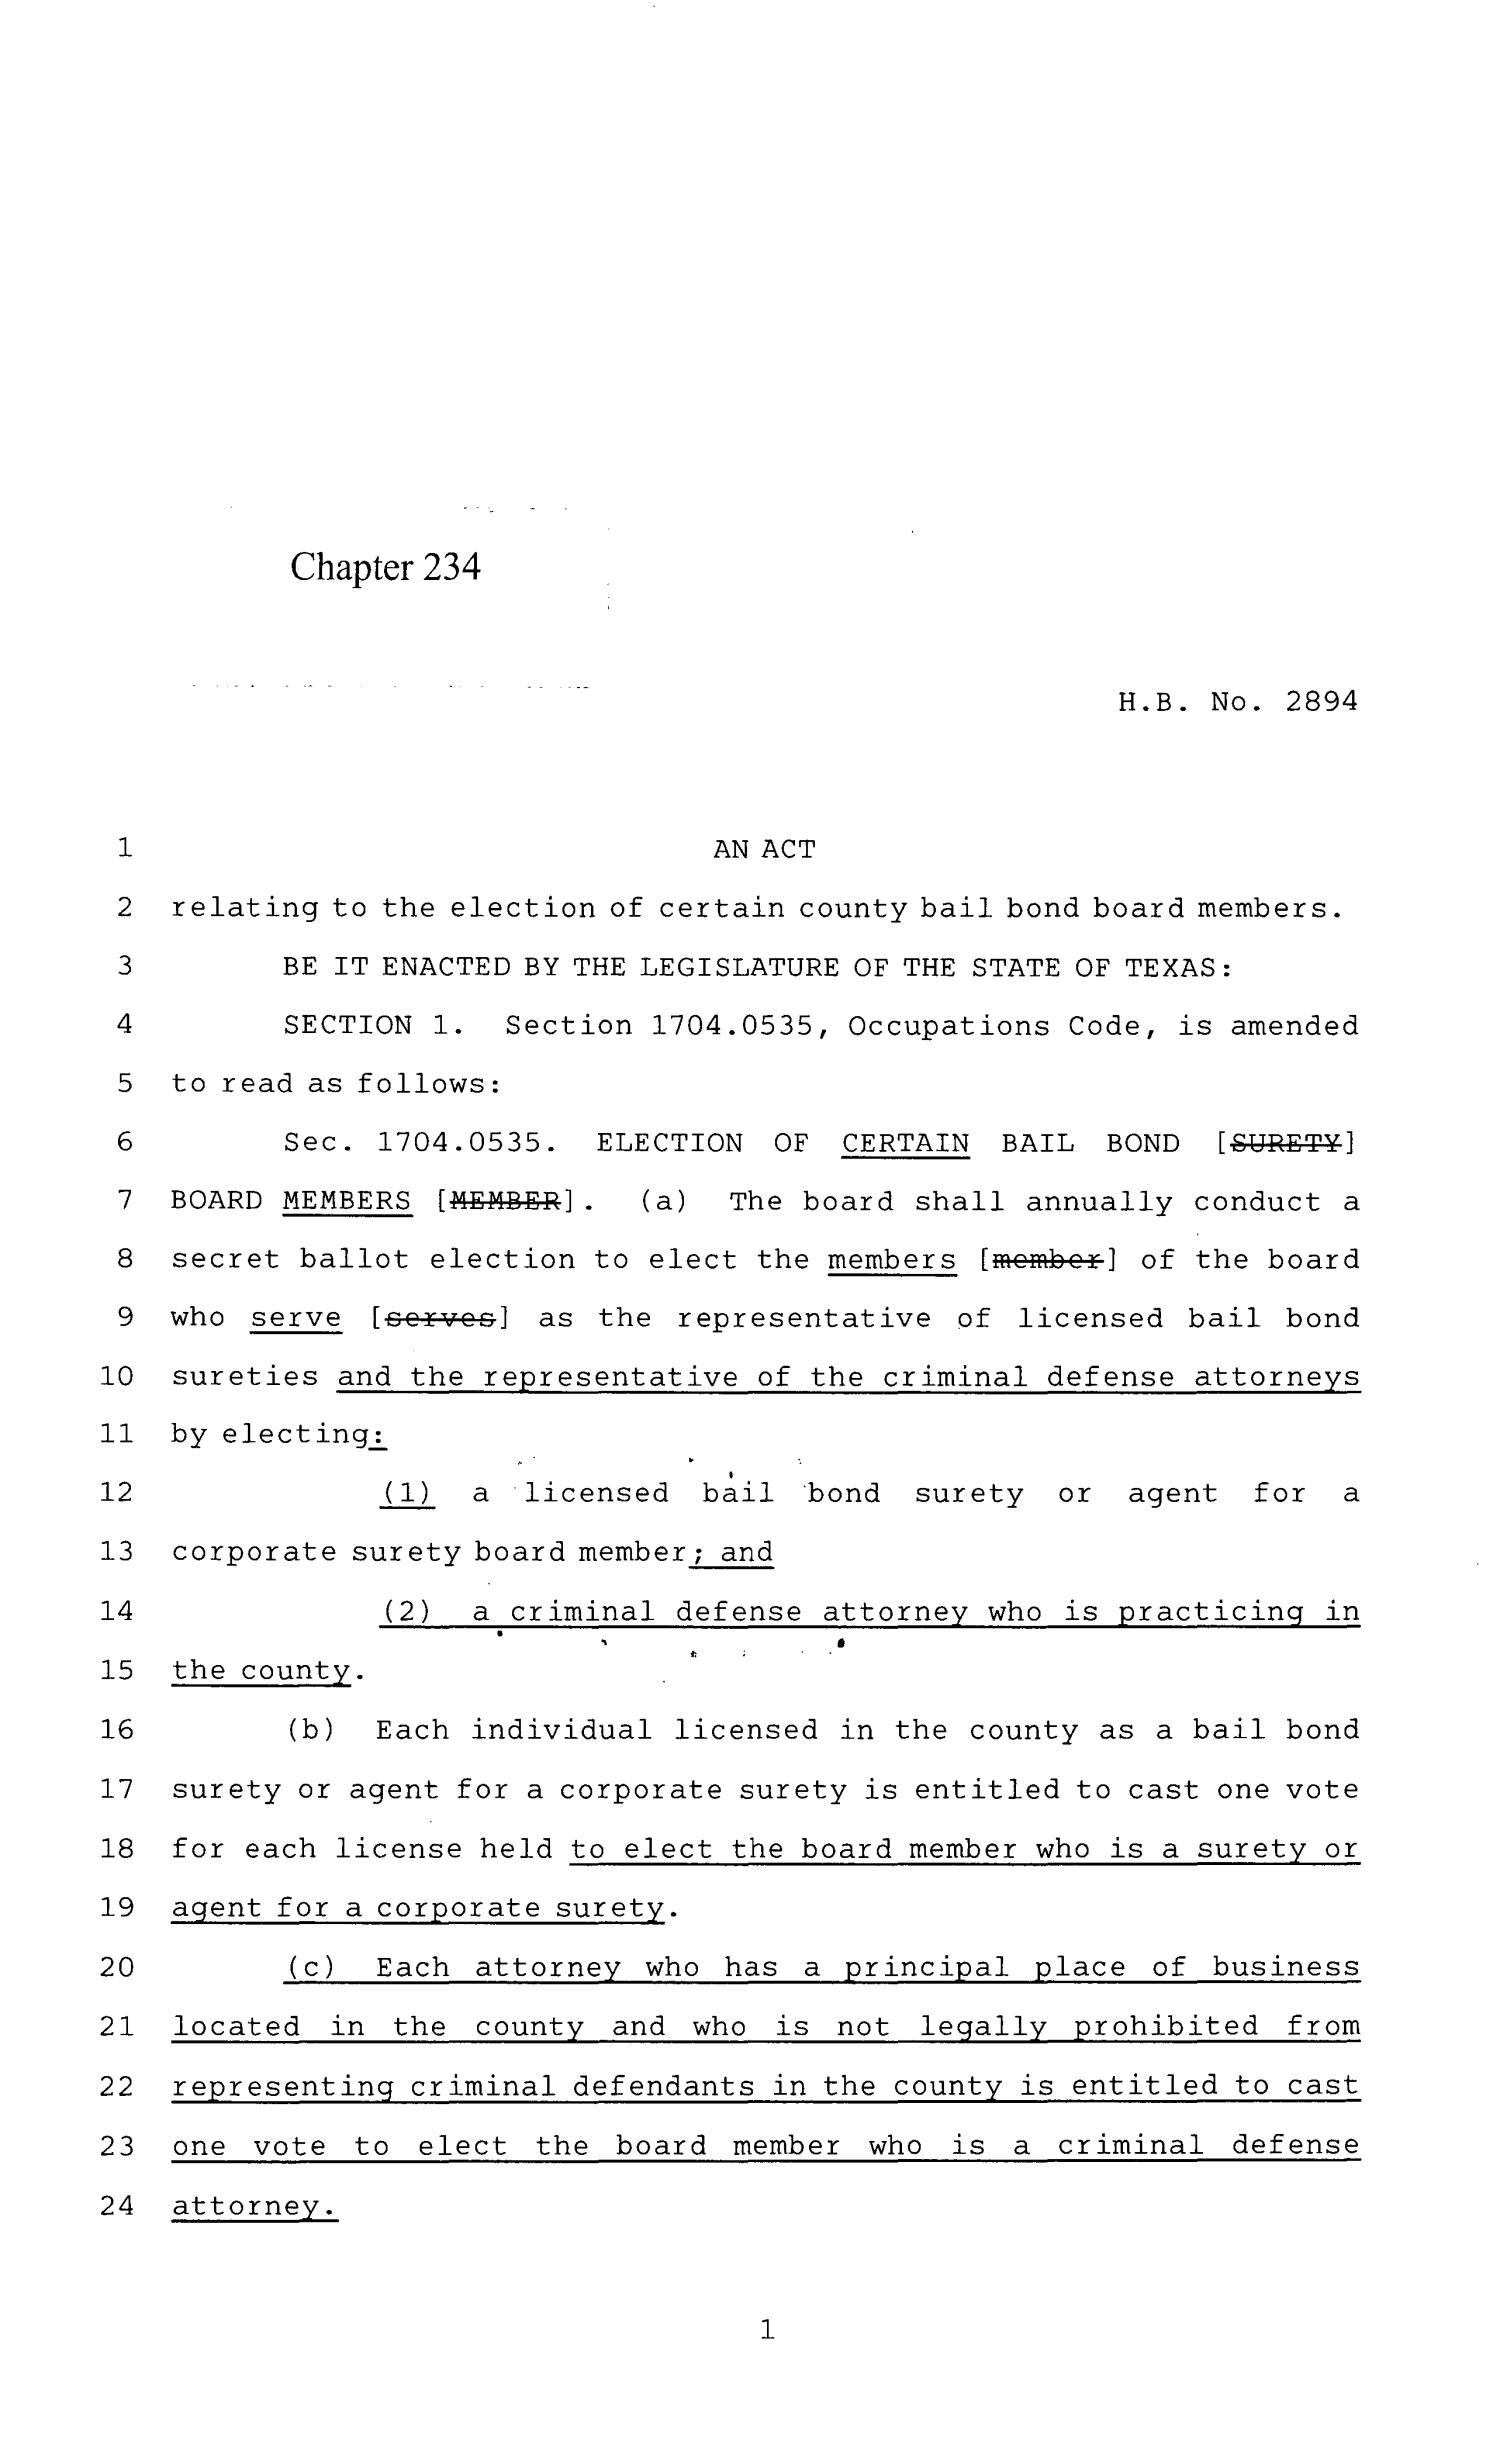 84th Texas Legislature, Regular Session, House Bill 2894, Chapter 234
                                                
                                                    [Sequence #]: 1 of 5
                                                